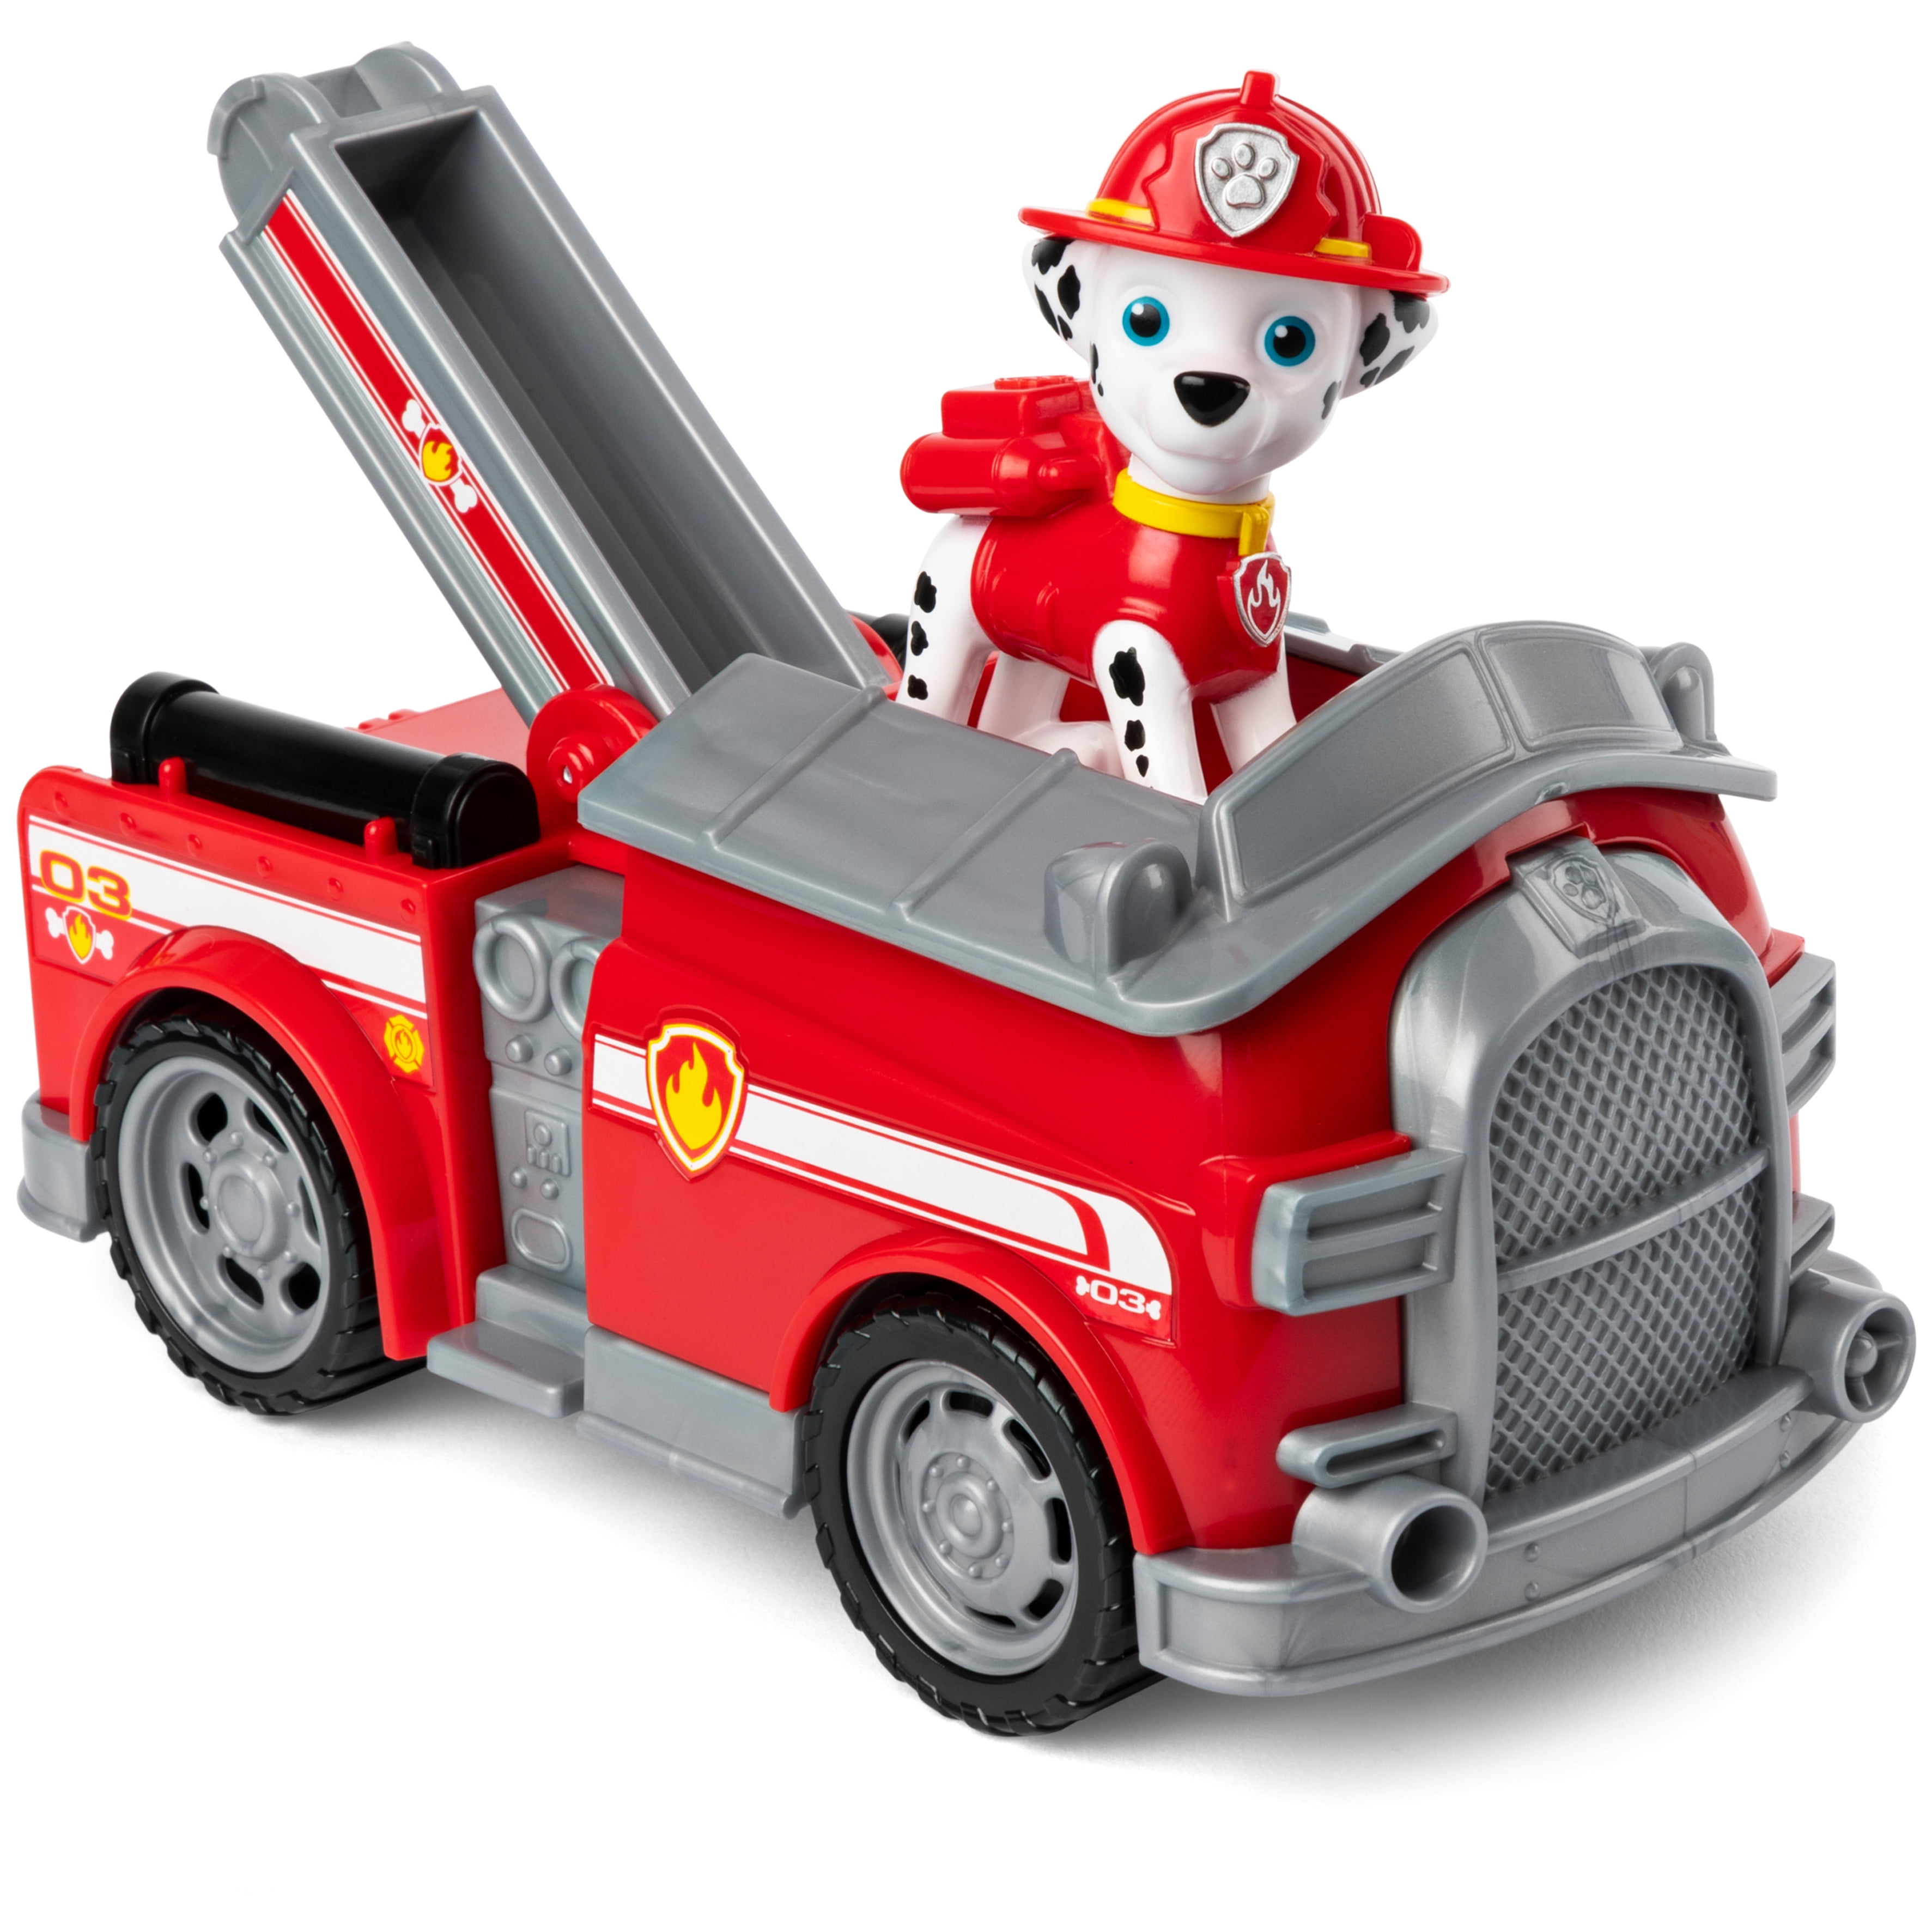 Paw Patrol Marshall’s Forest Fire Truck Vehicle Figure and Vehicle 